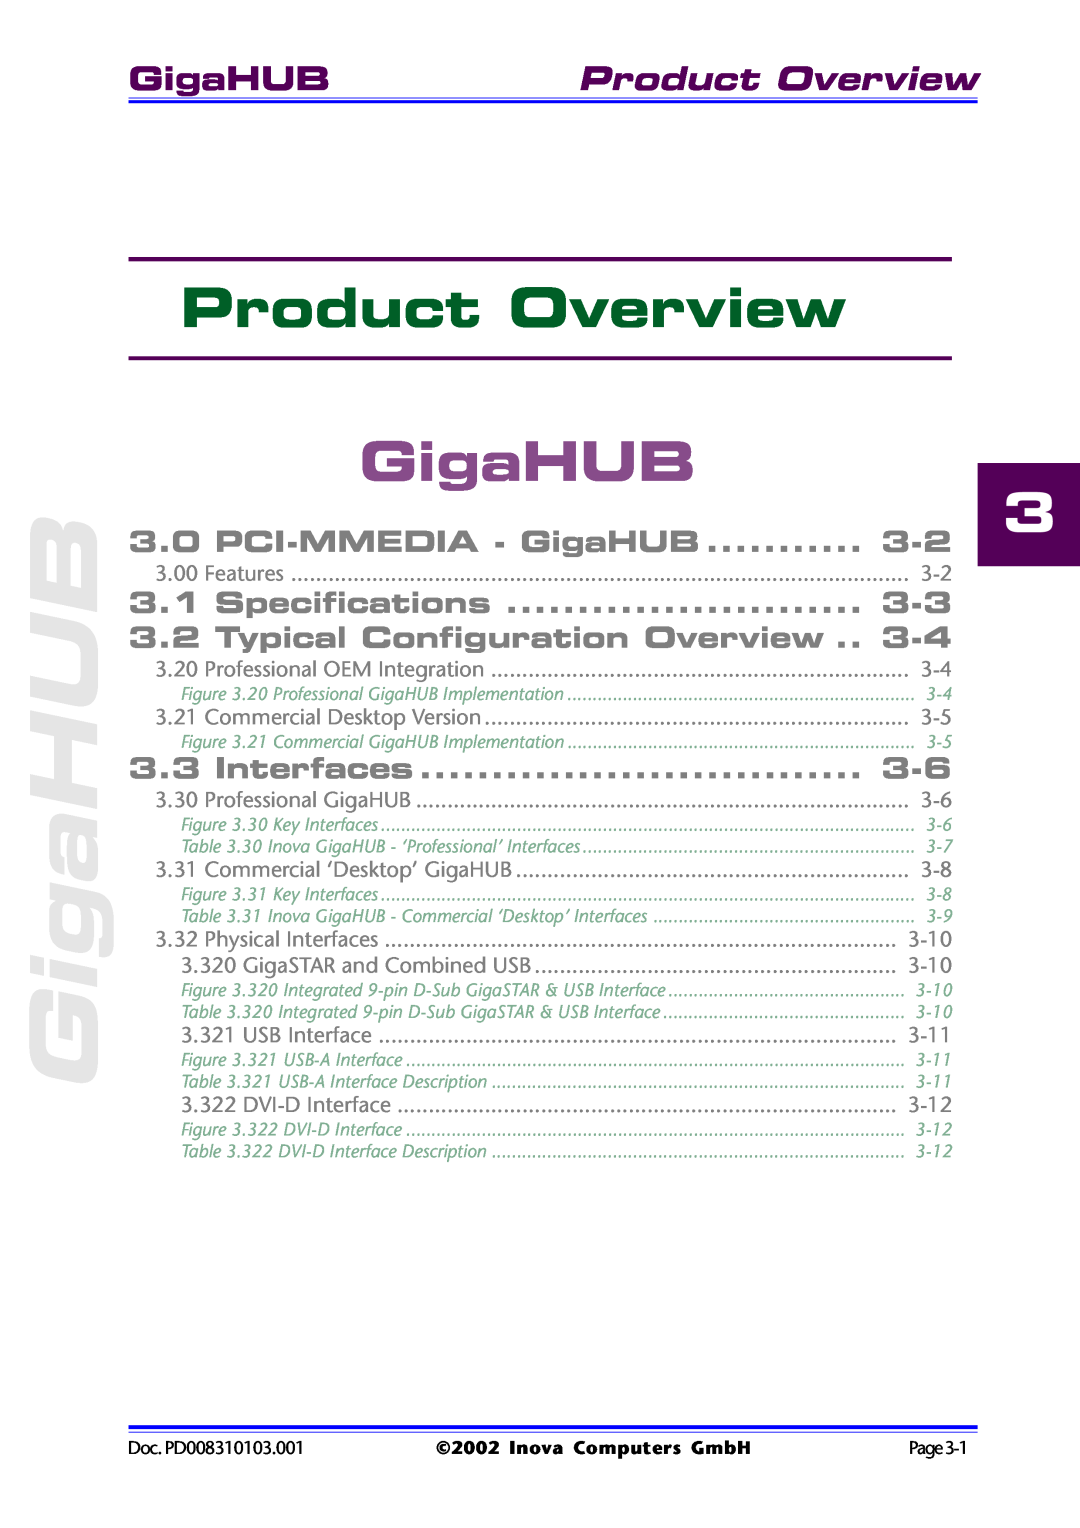 Inova PD008310103.001 AB Product Overview, PCI-MMEDIA - GigaHUB, Specifications, Typical Configuration Overview 